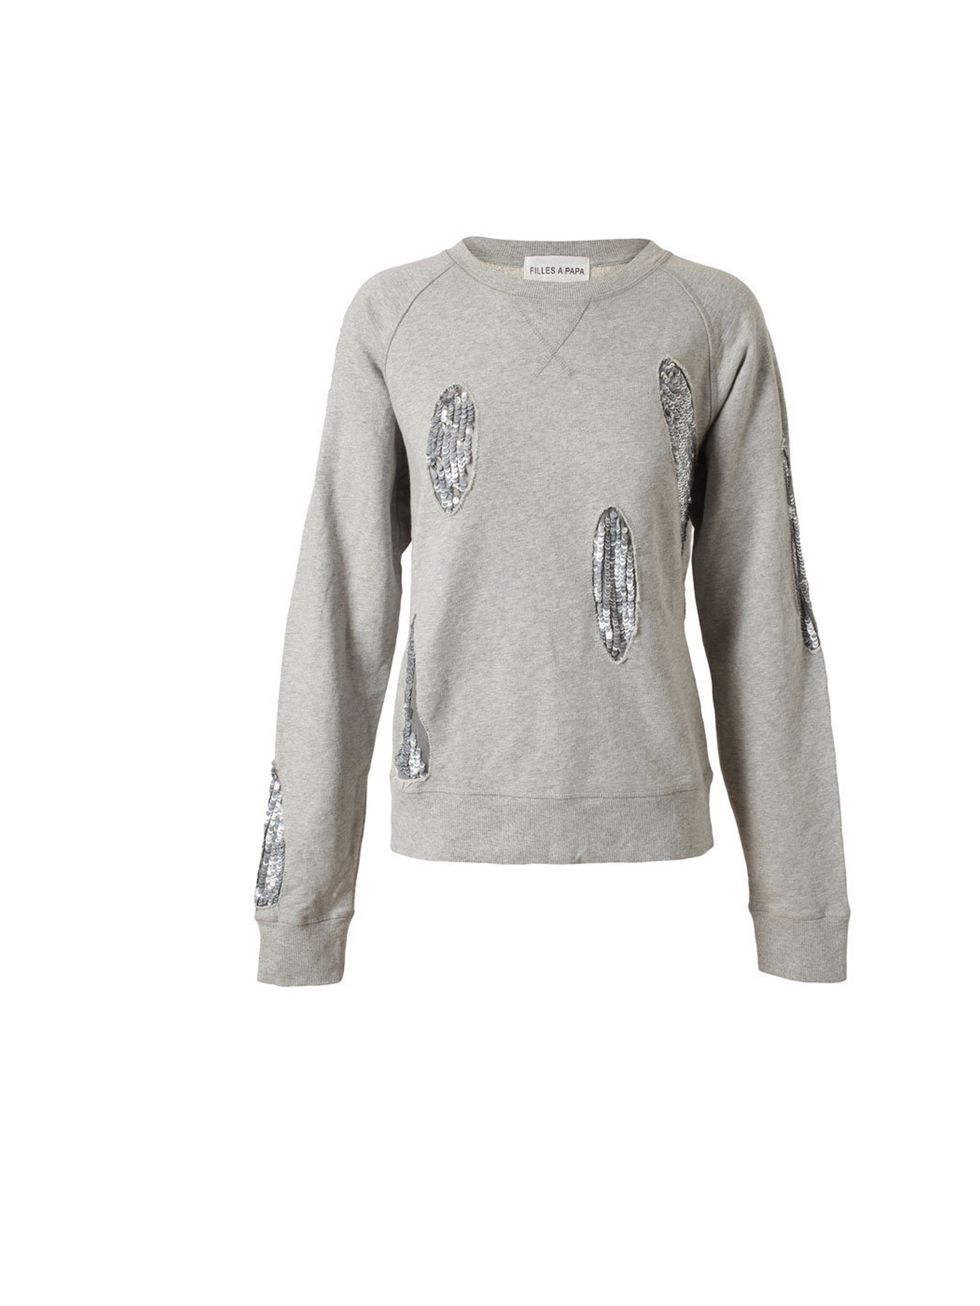 <p>Our new favourite label just got cooler. Sequins and sweatshirts combine for undeniably cool effect Filles A Papa sequin sweater, £195, at Browns</p><p><a href="http://shopping.elleuk.com/browse?fts=filles+a+papa+sequin+sweater">BUY NOW</a></p>